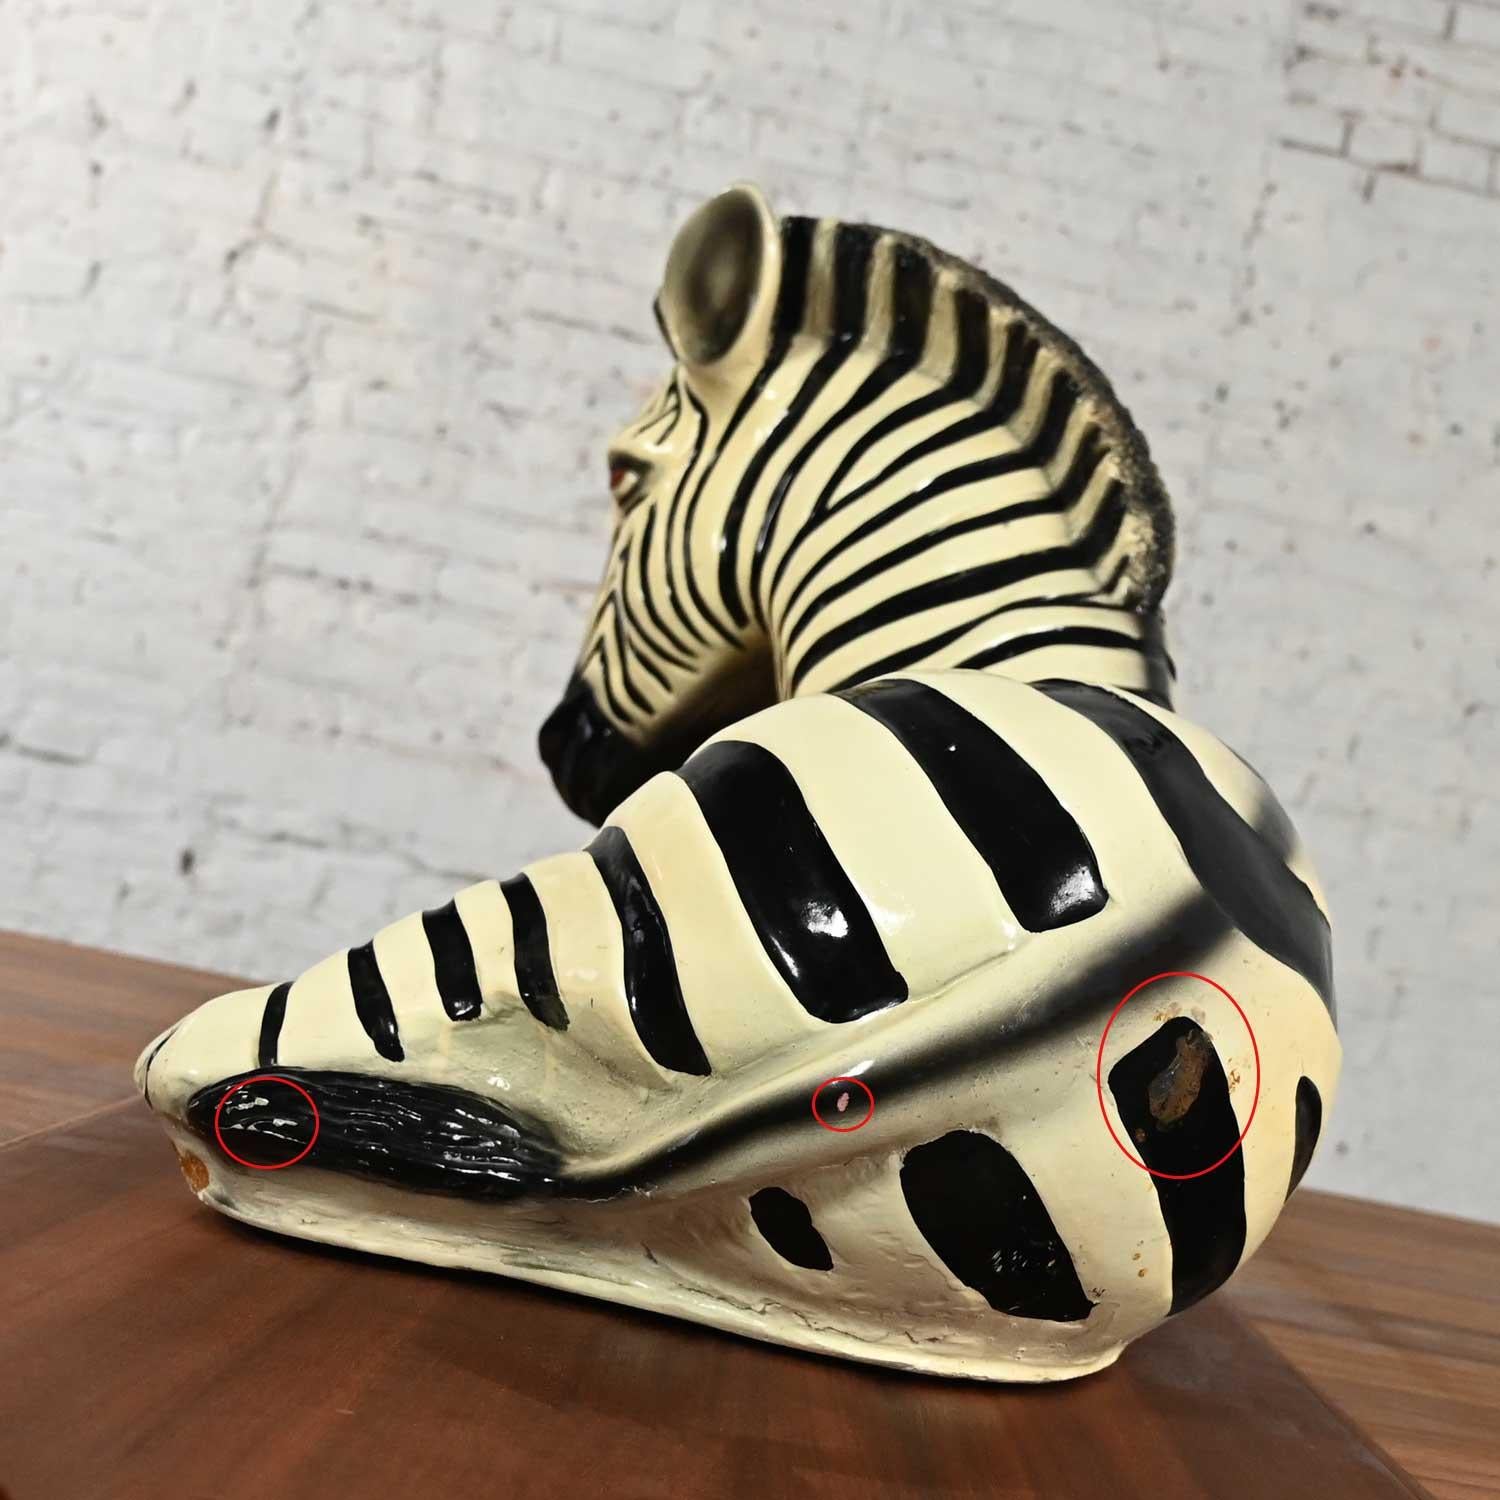 1970s Marwal Industries Large Scale Zebra Molded Resin Statue or Sculpture For Sale 6